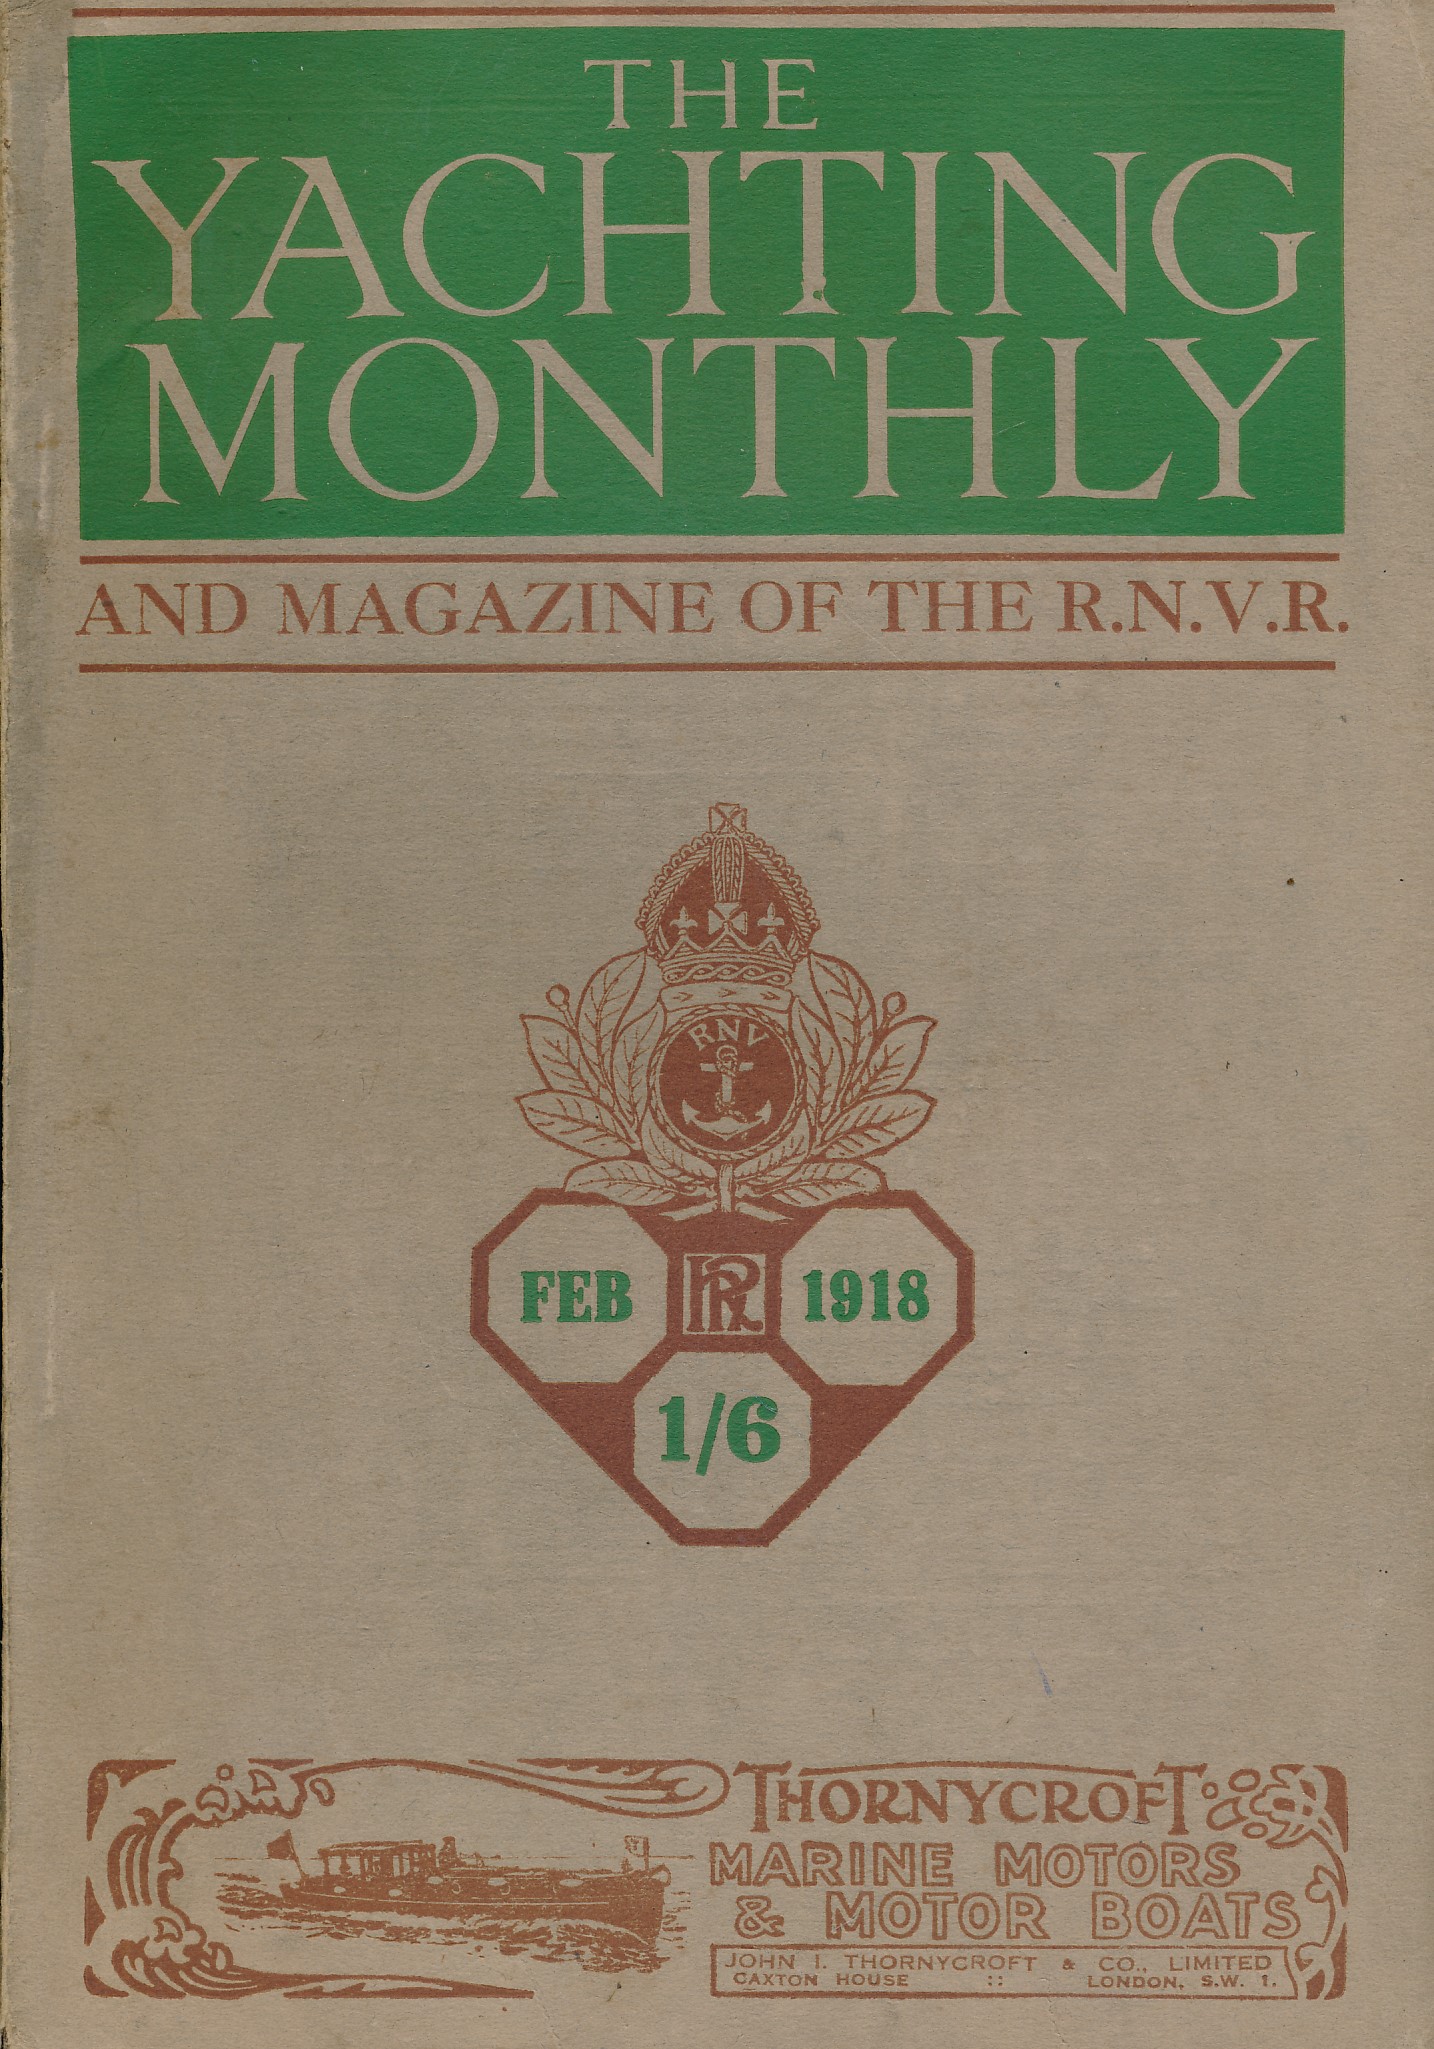 The Yachting Monthly and Magazine of the R.N.V.R.  Volume 142.- Vol. XXIV. February, 1918.